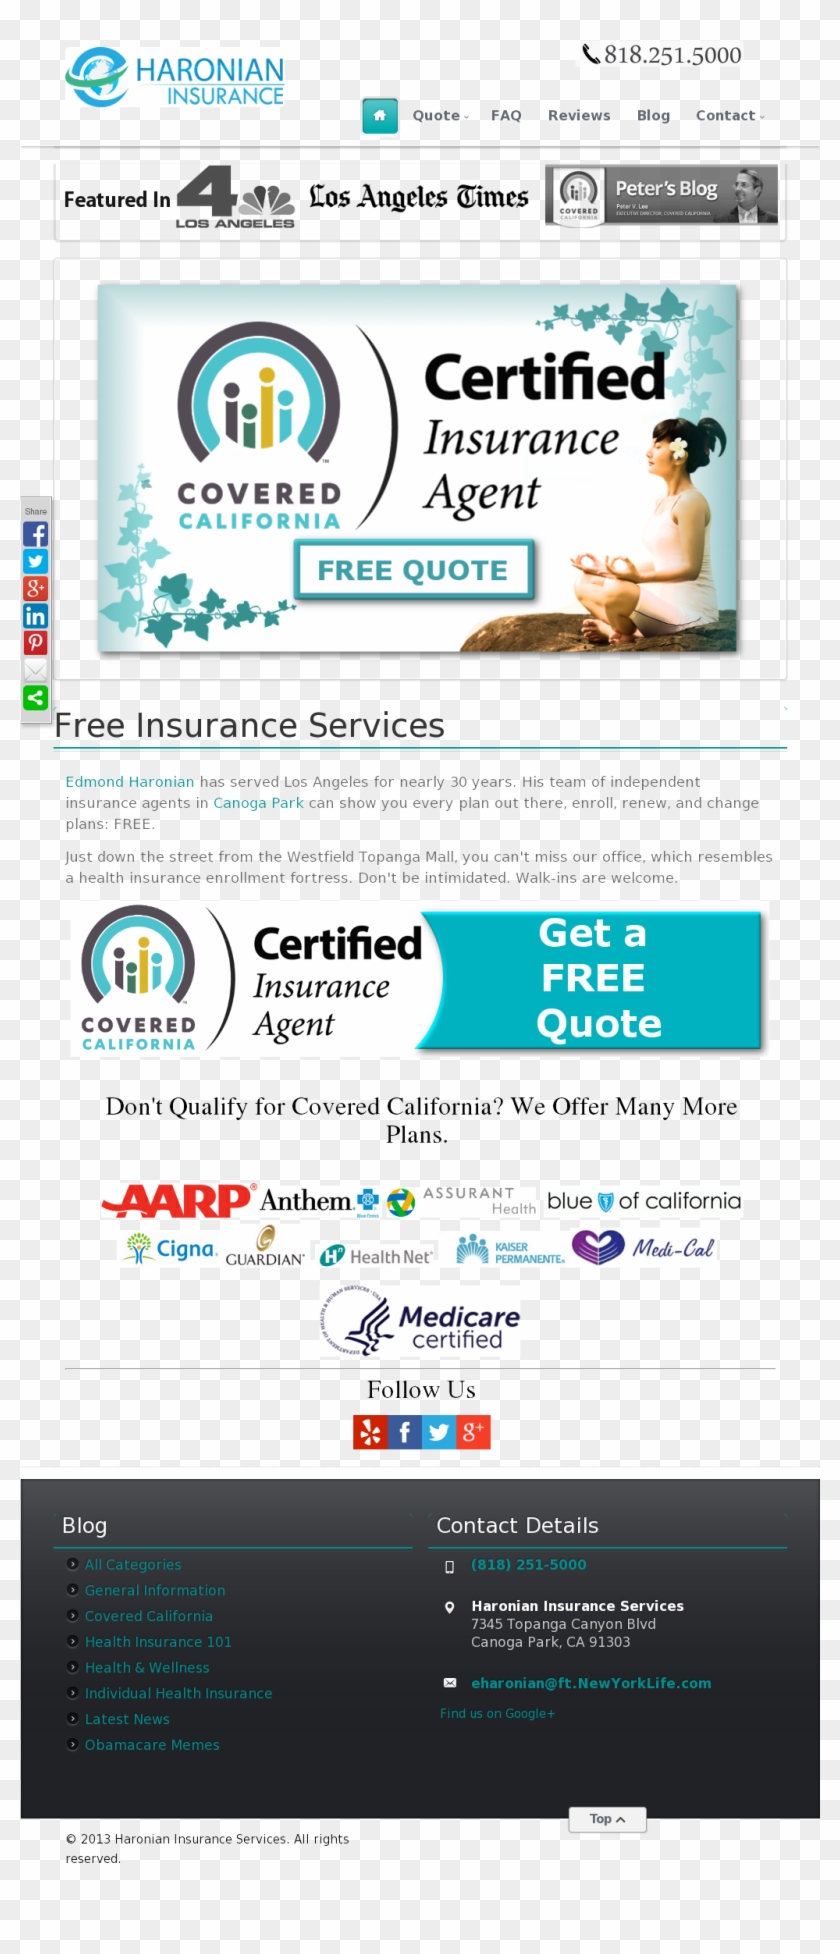 Eharonianinsurance Competitors, Revenue And Employees - Covered California Clipart #4298294